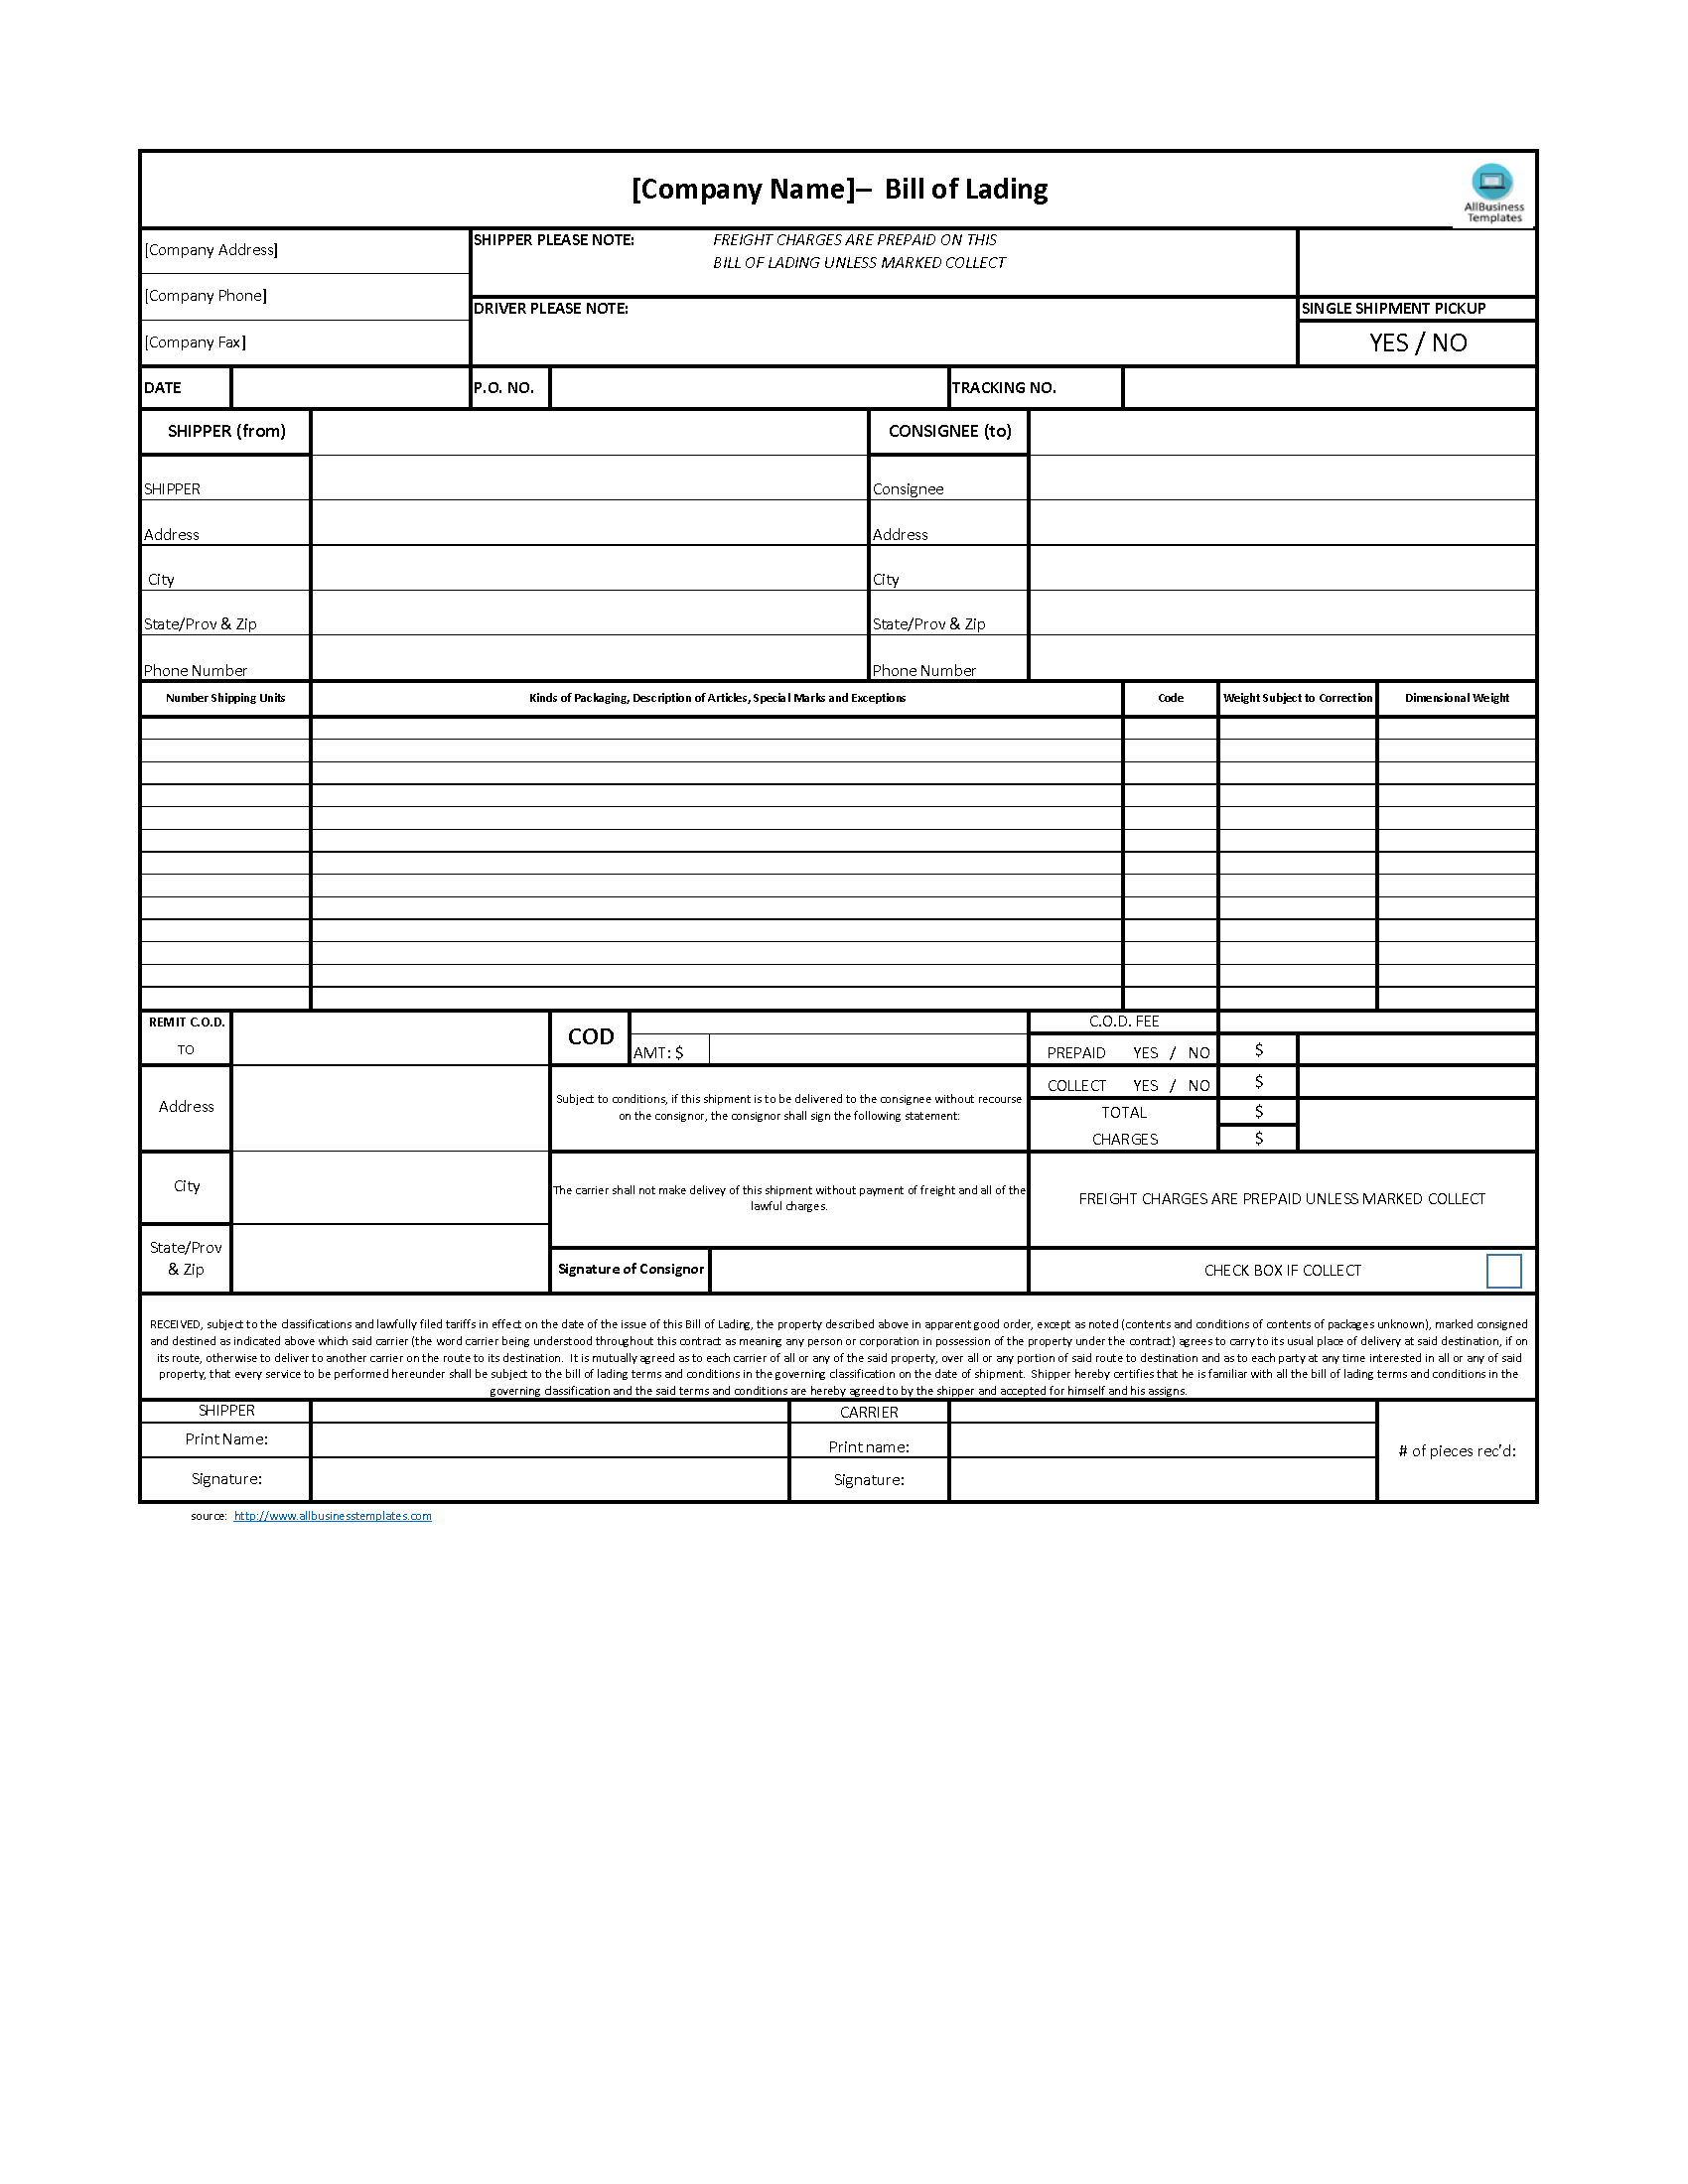 bill-of-lading-excel-template-templates-at-allbusinesstemplates